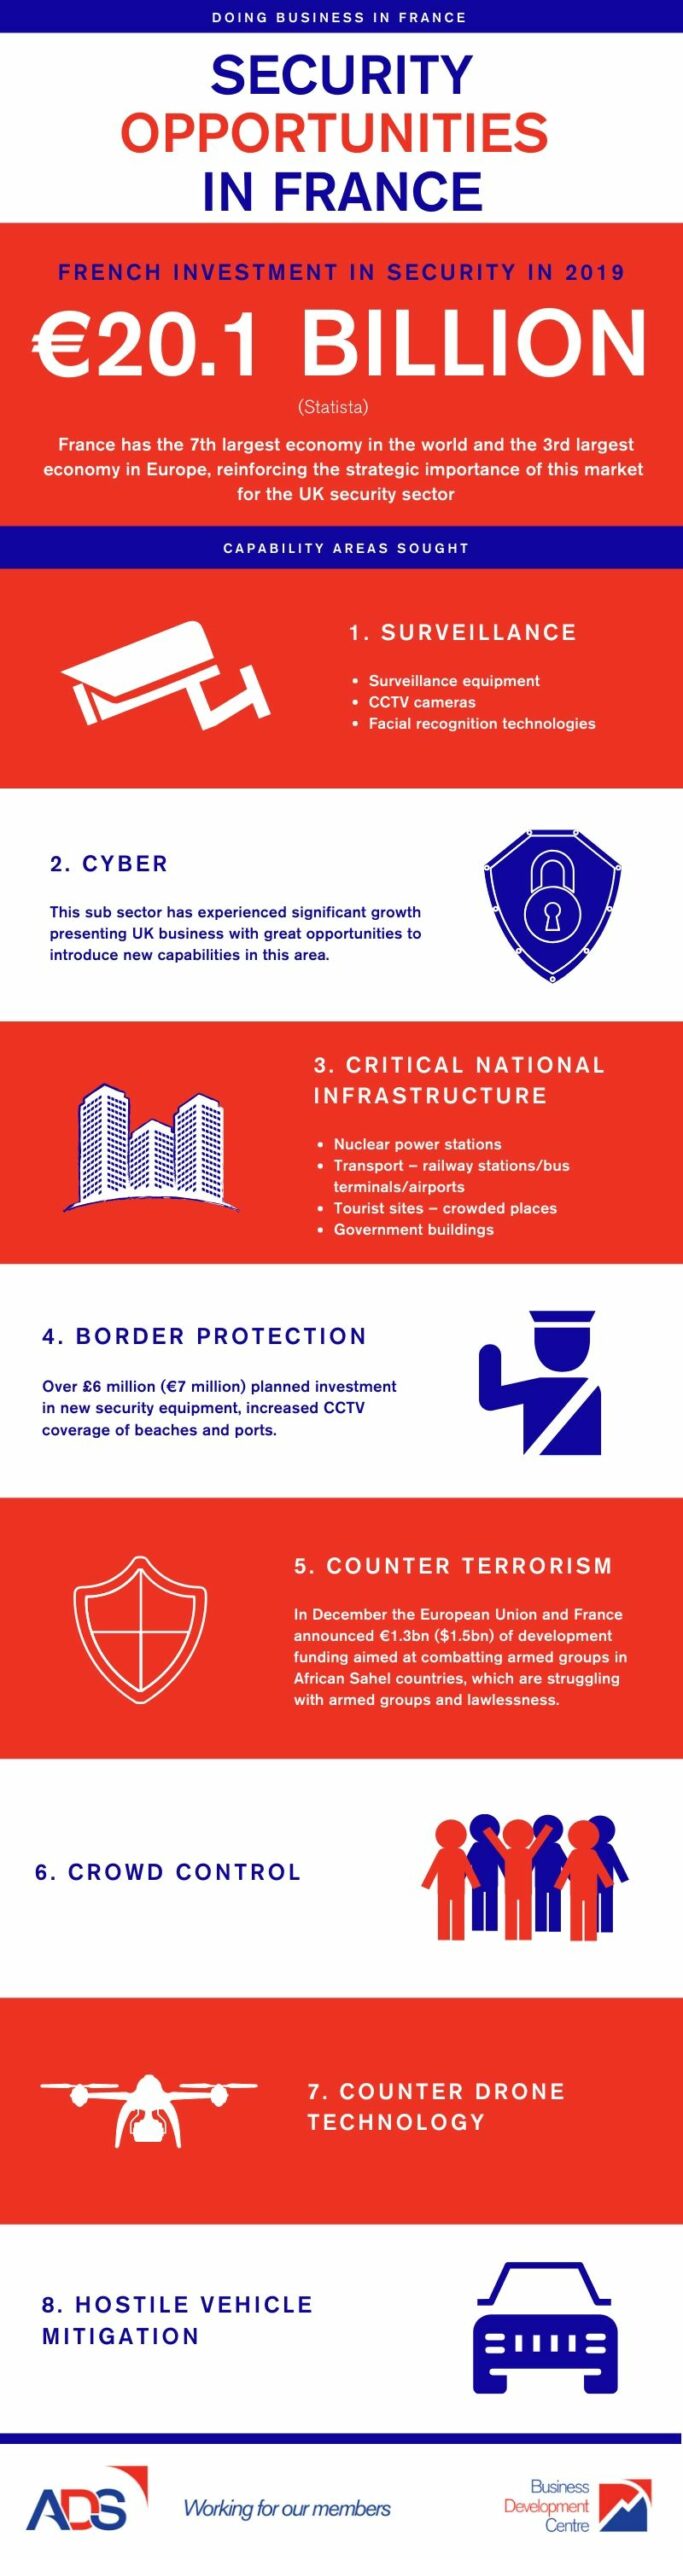 French Security Opportunities - Oct 2019 Infographic